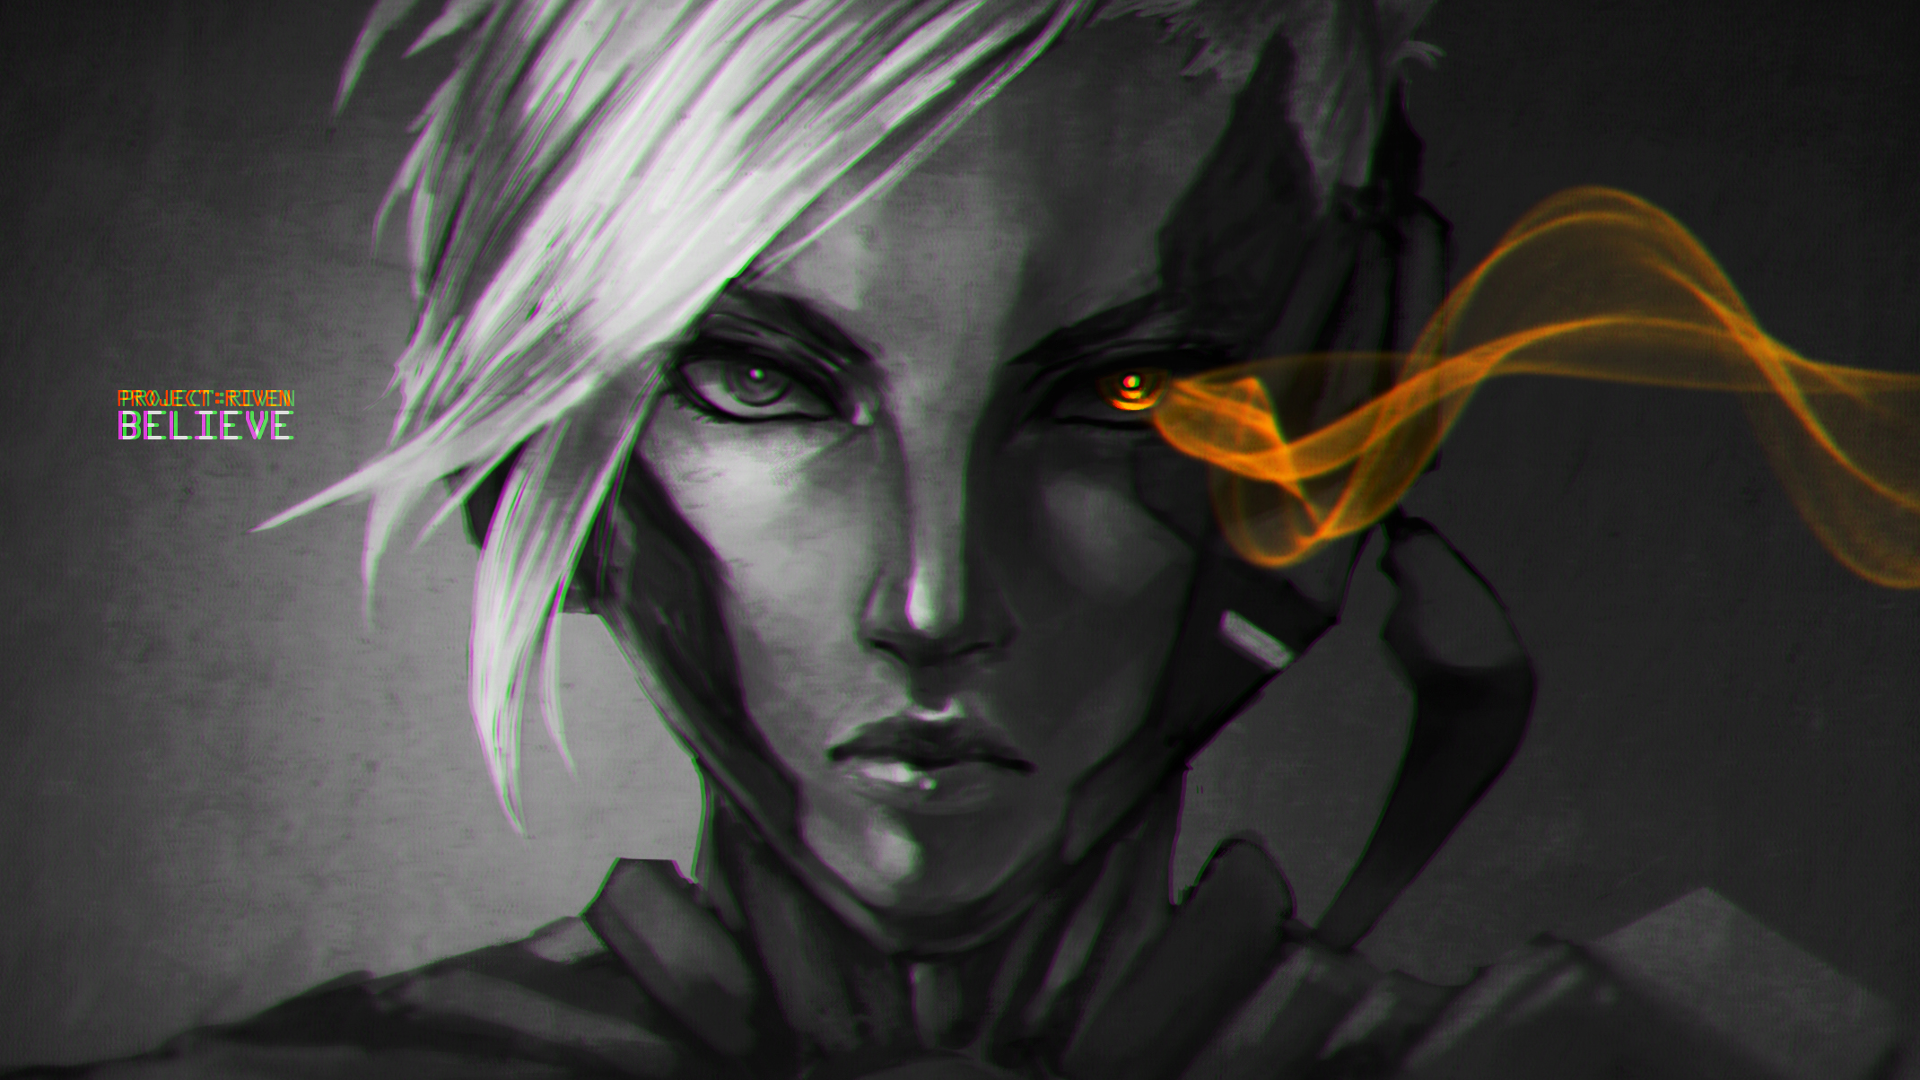 PROJECT: Riven by Monori Rogue